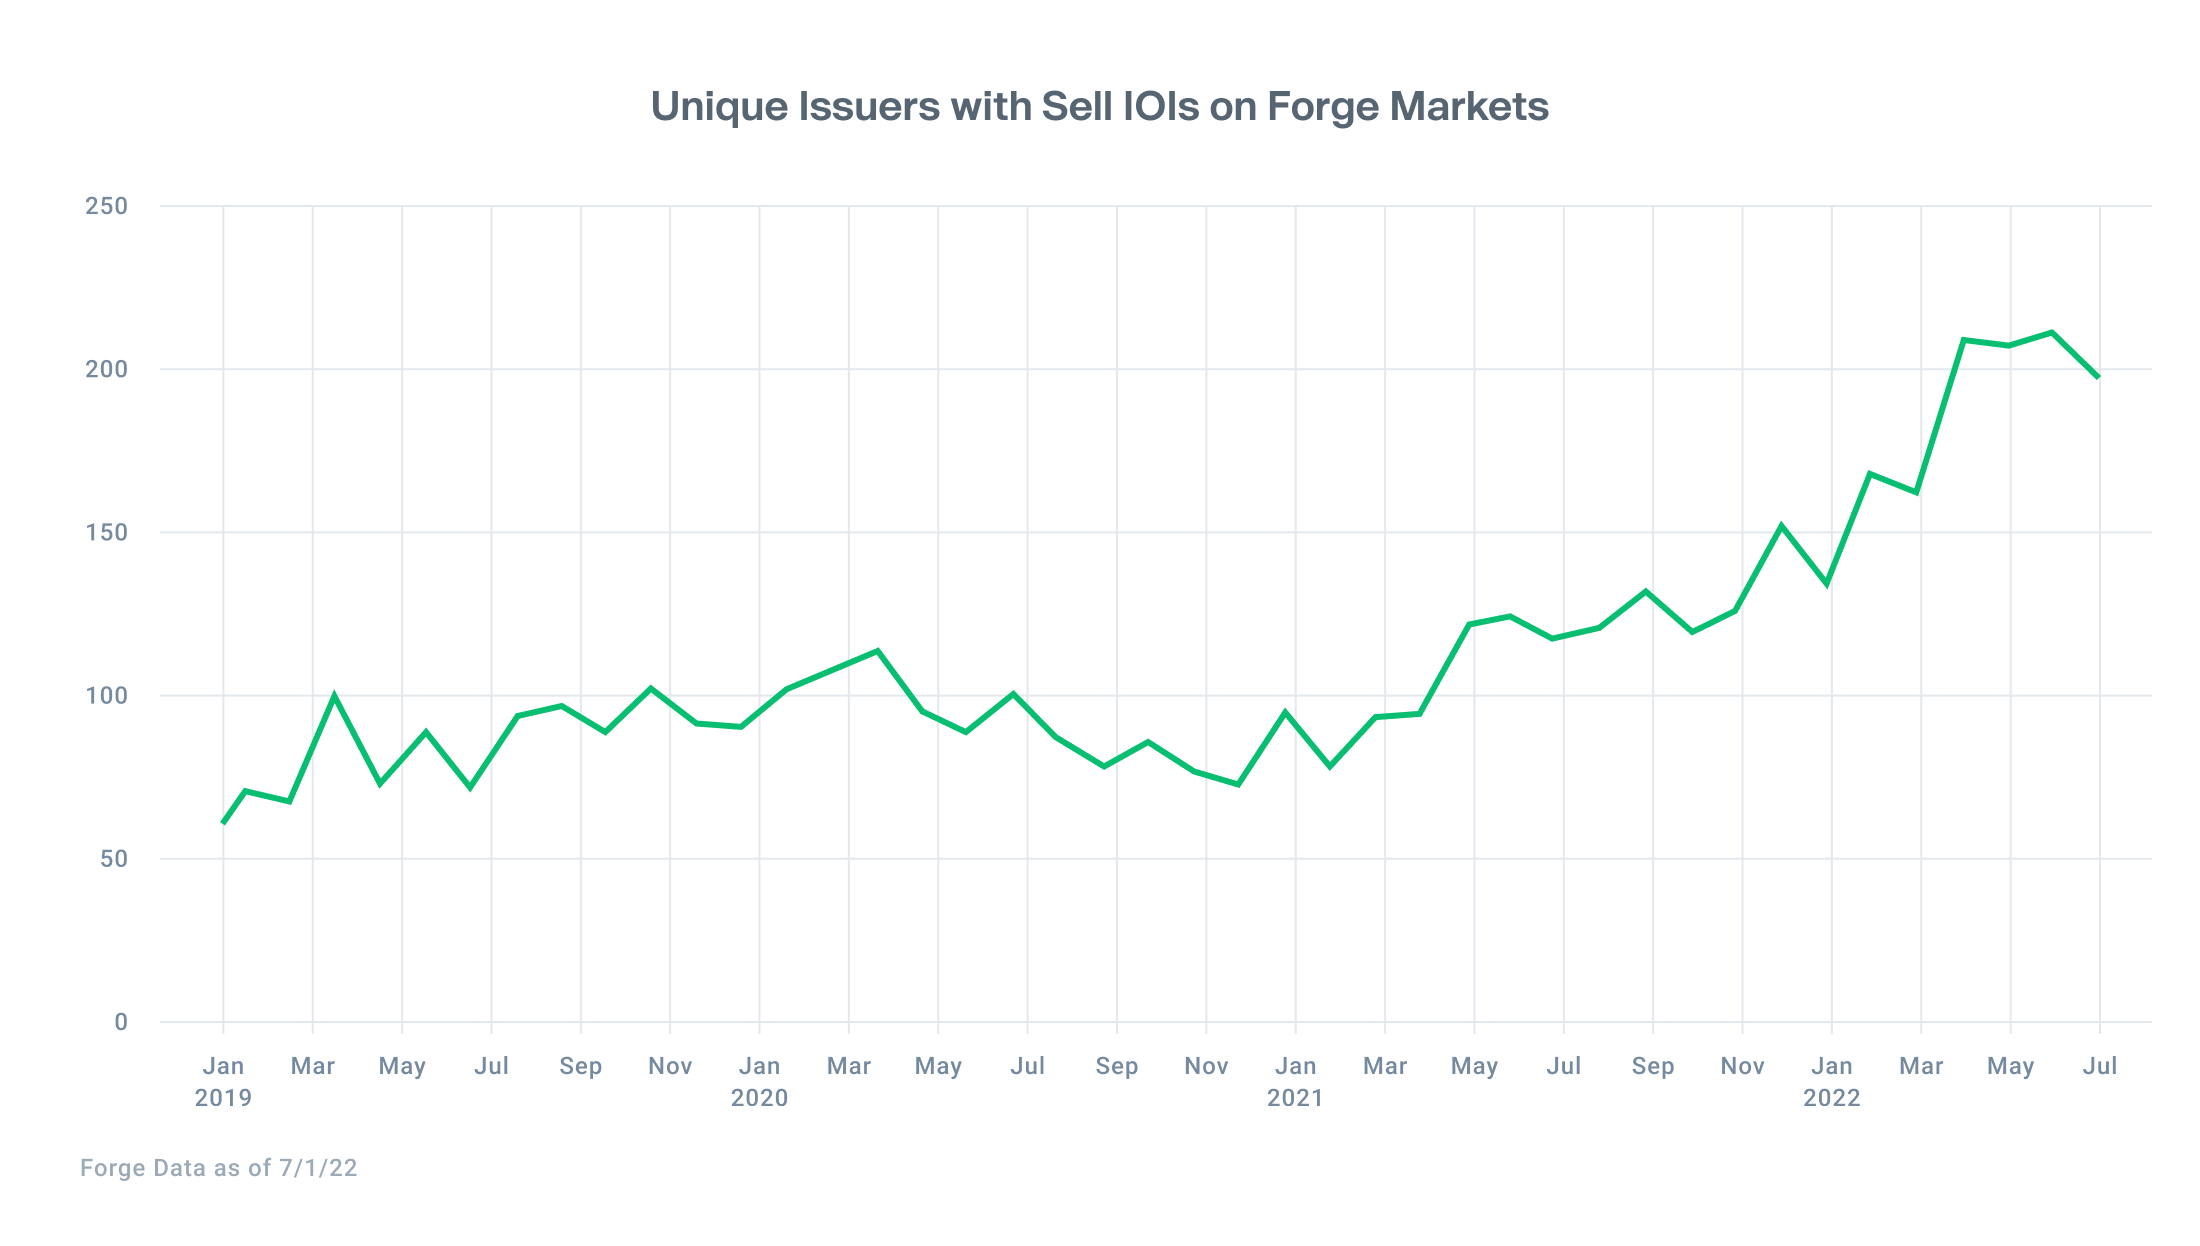 Line chart shows a slight decline in the number of unique issuers with a sell indication of interest on Forge Markets